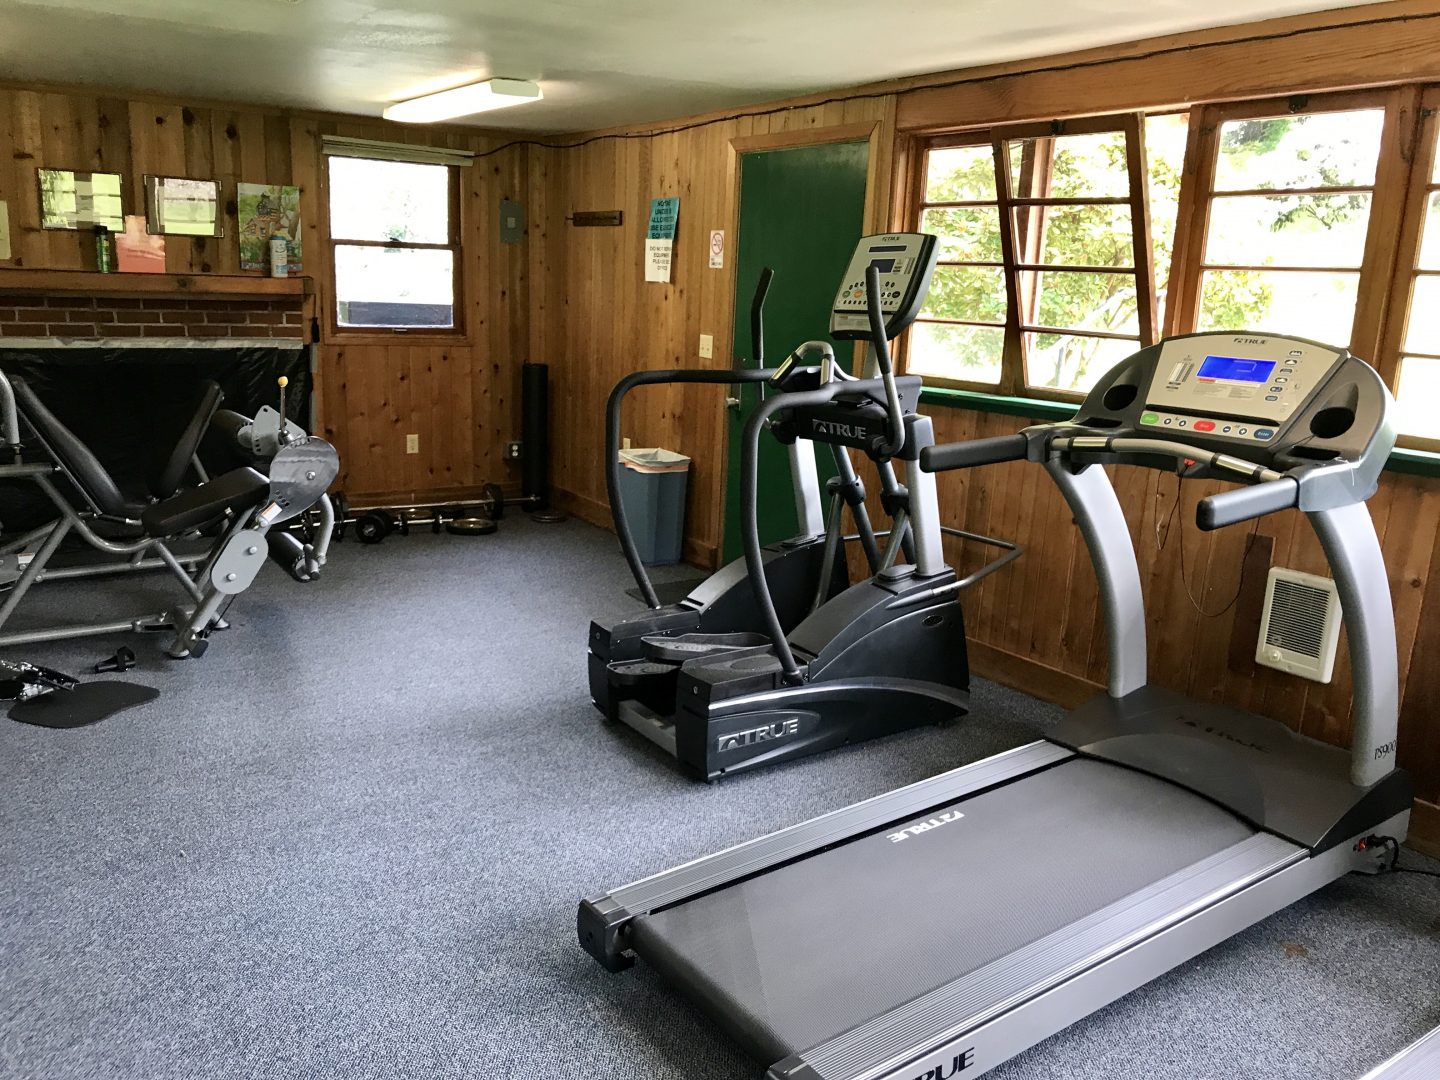 The exercise facility at Portland Fairview RV Park includes equipment for cardiovascular and weight training.